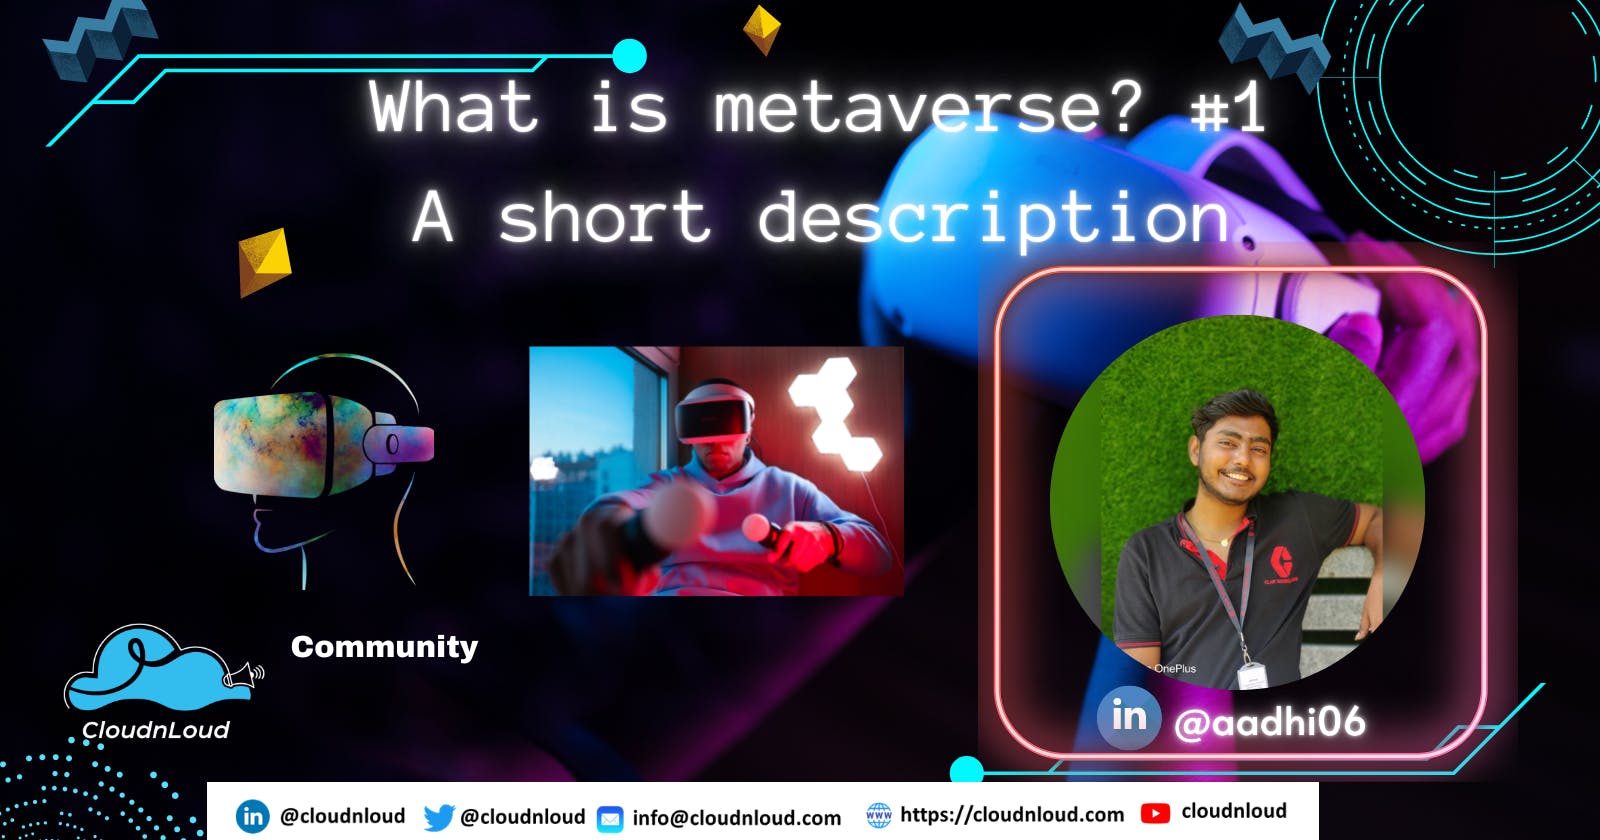 Metaverse and what is its future?